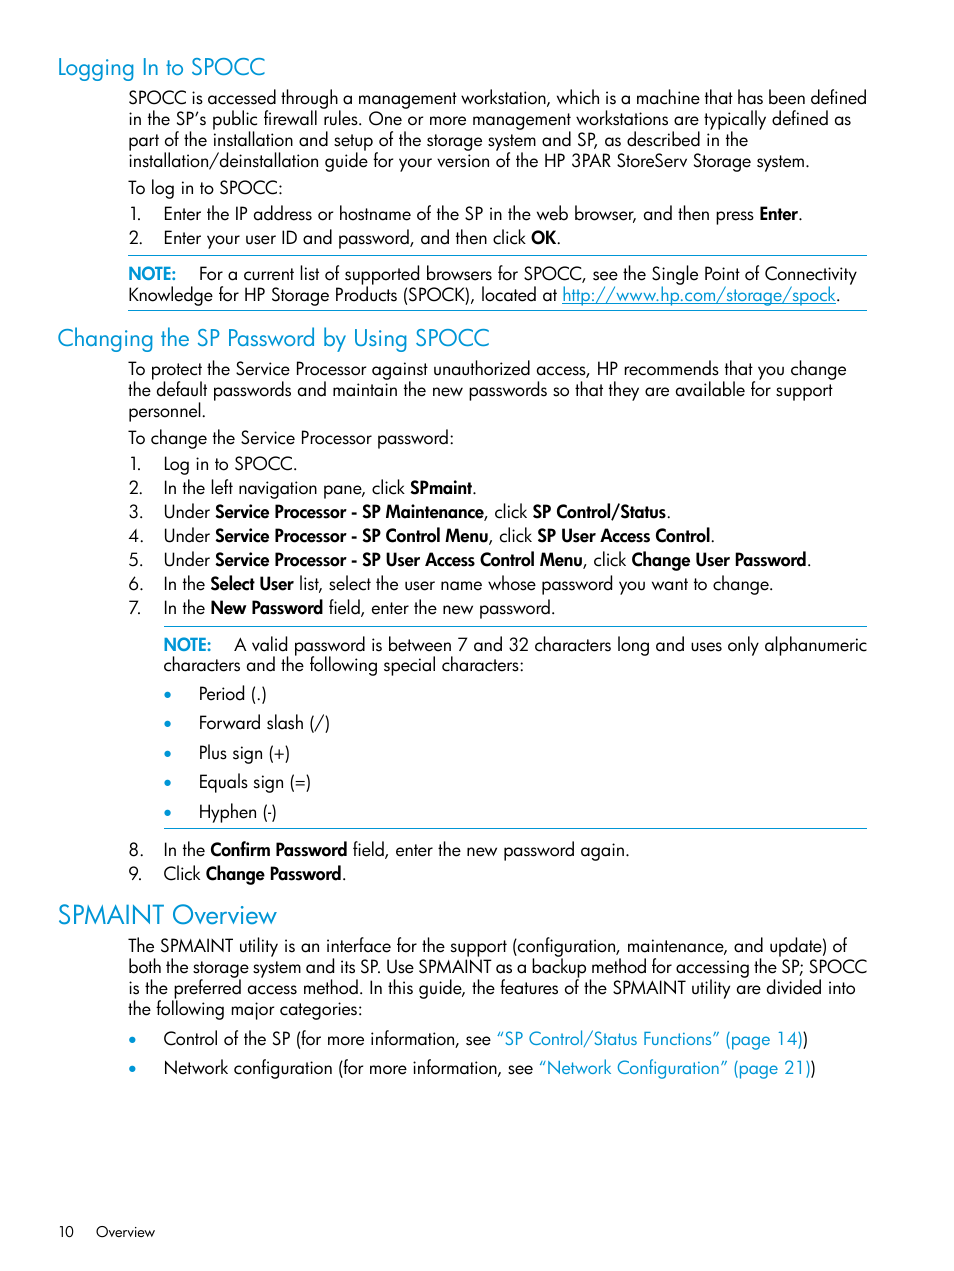 Logging in to spocc, Changing the sp password by using spocc, Spmaint overview | HP 3PAR Service Processors User Manual | Page 10 / 51